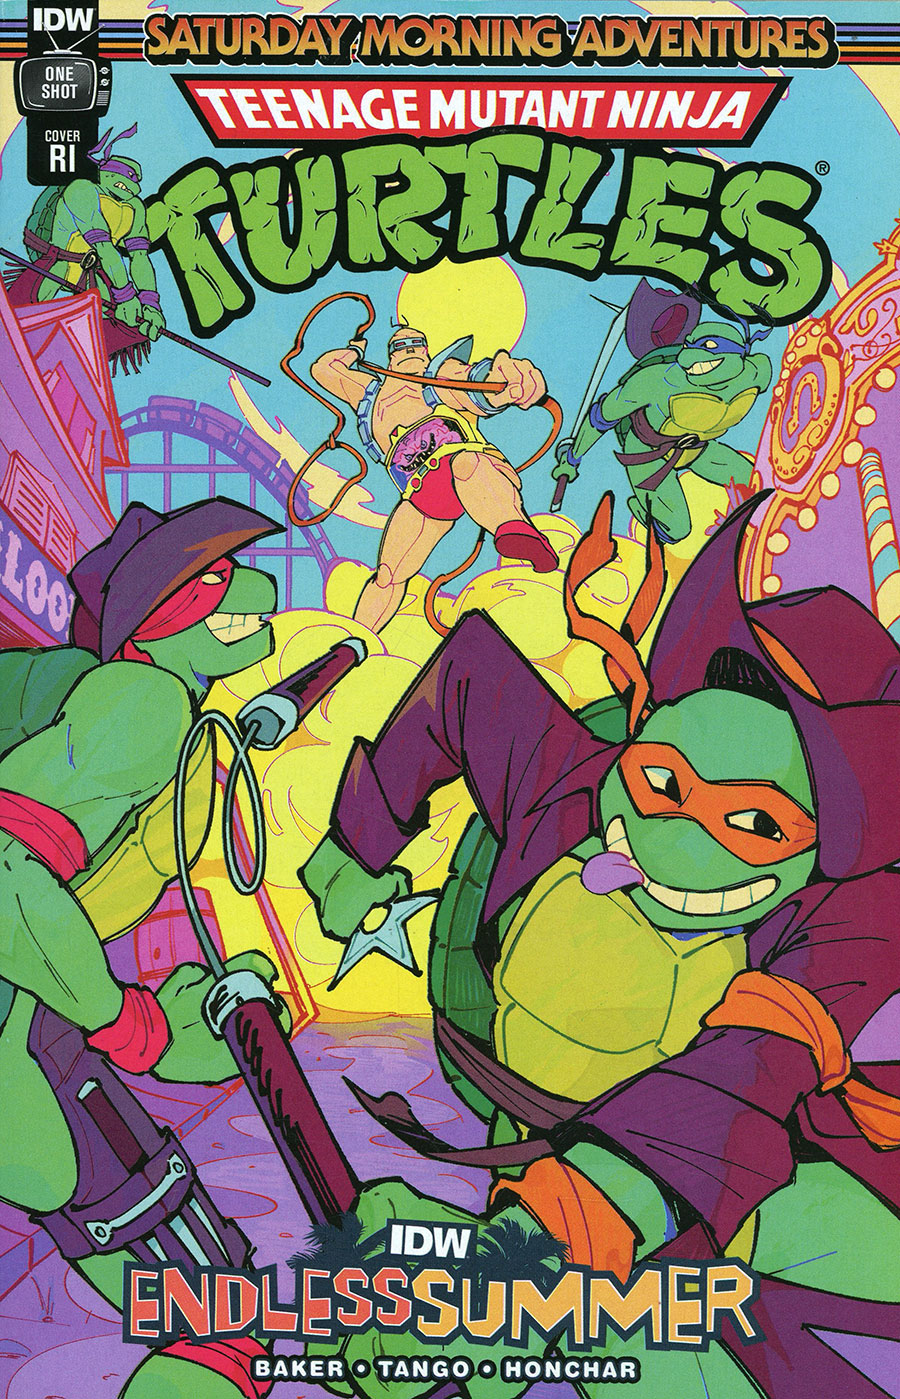 IDW Endless Summer Teenage Mutant Ninja Turtles Saturday Morning Adventures #1 (One Shot) Cover D Incentive Roxy Flores Variant Cover